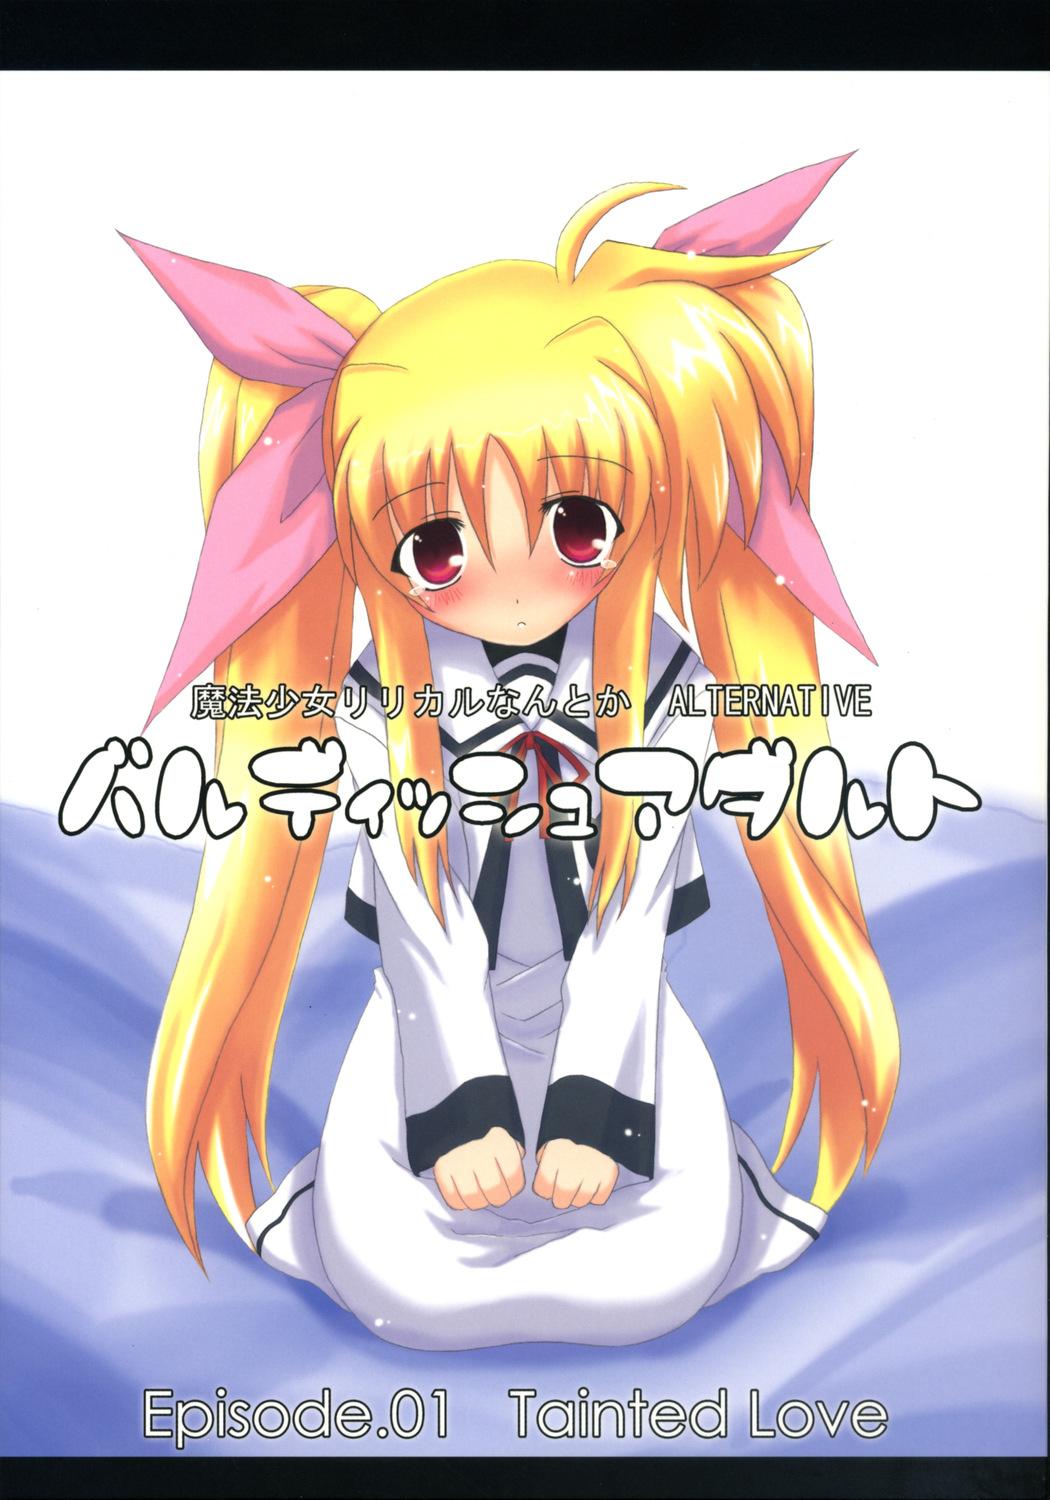 Sex Pussy Bardiche Adult Episode.01 Tainted Love - Mahou shoujo lyrical nanoha Booty - Page 1